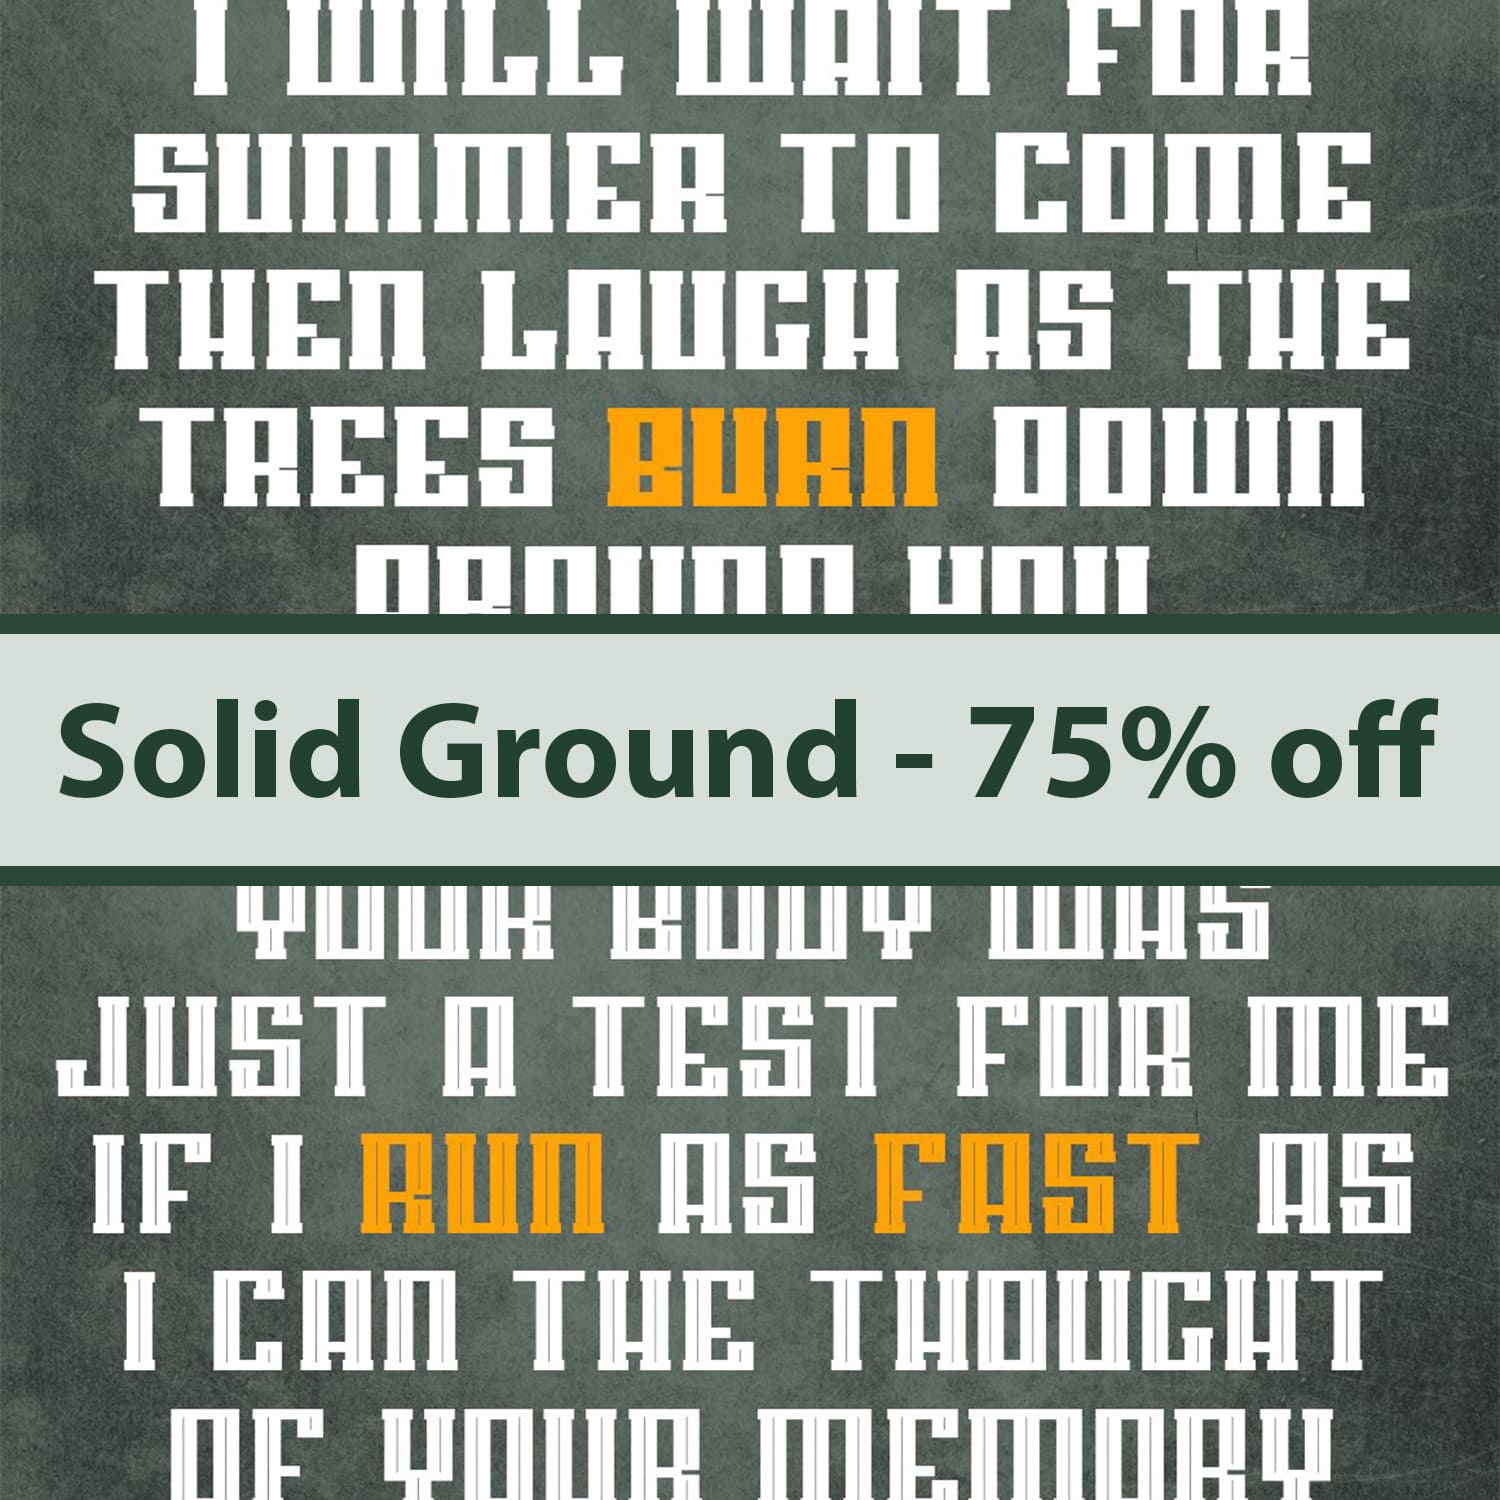 Solid Ground - 75% off cover image.